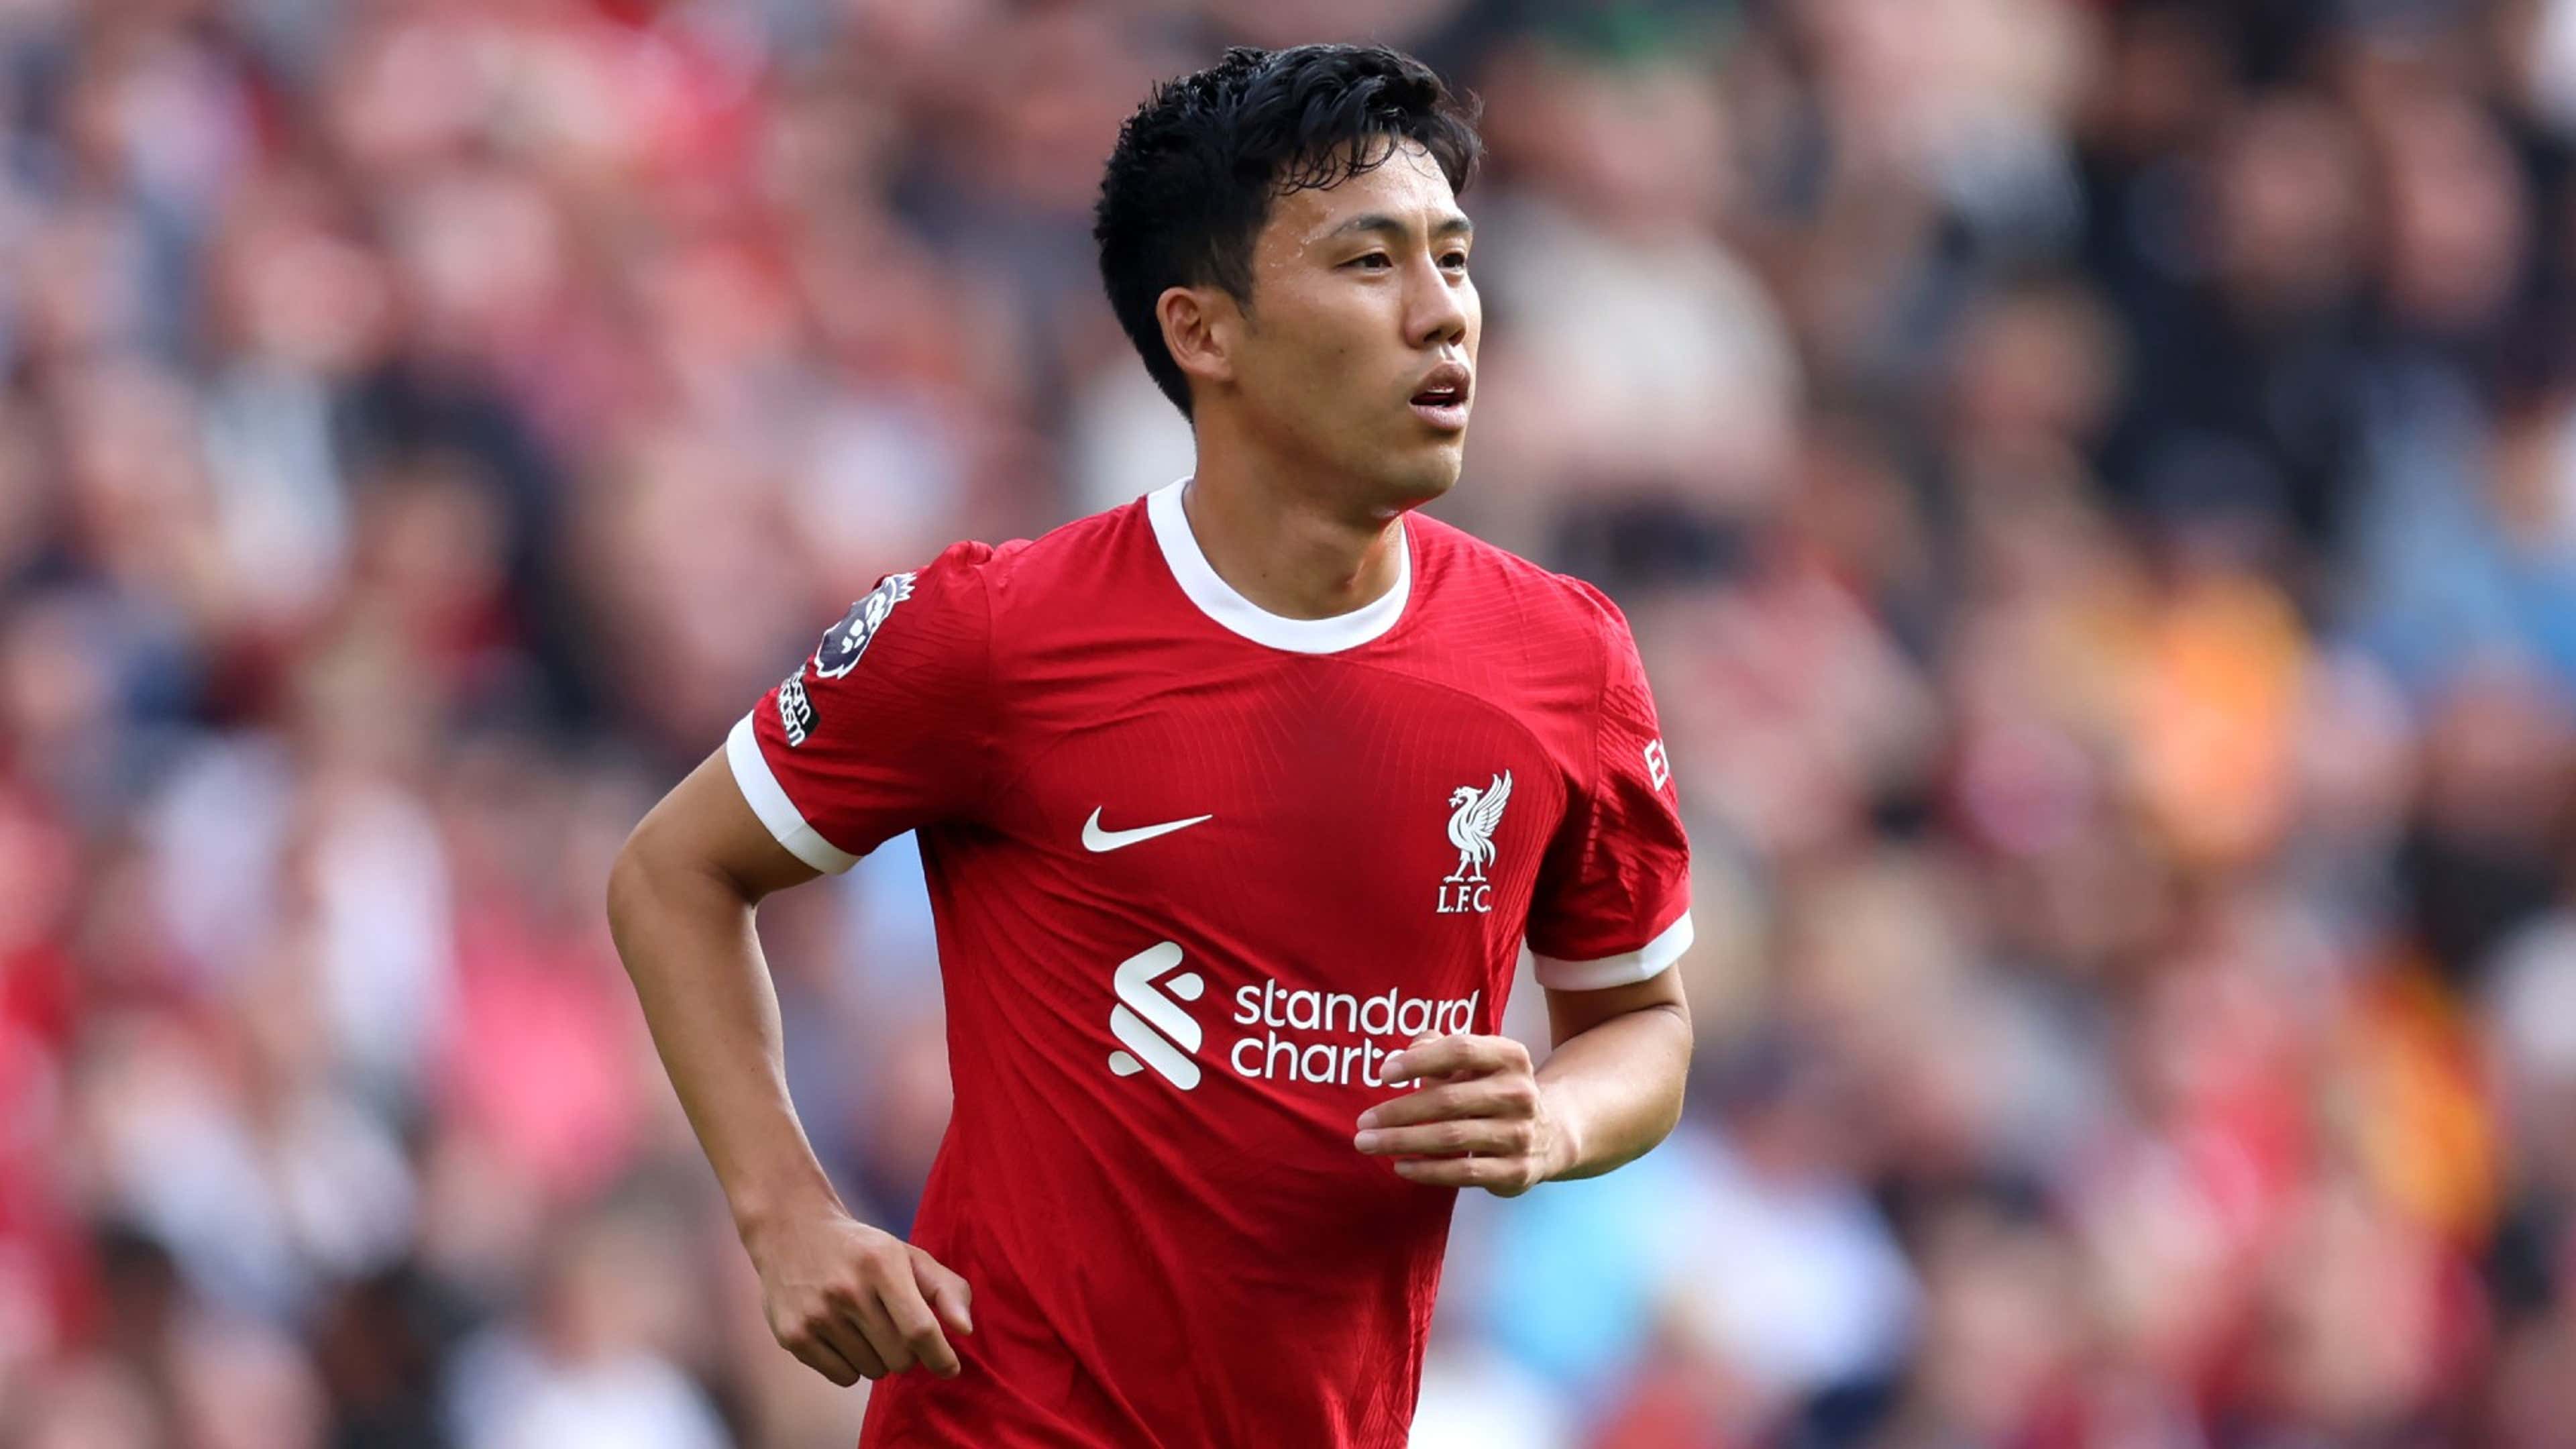 Liverpool reportedly turned down move for Sofyan Amrabat to get Wataru Endo on board.